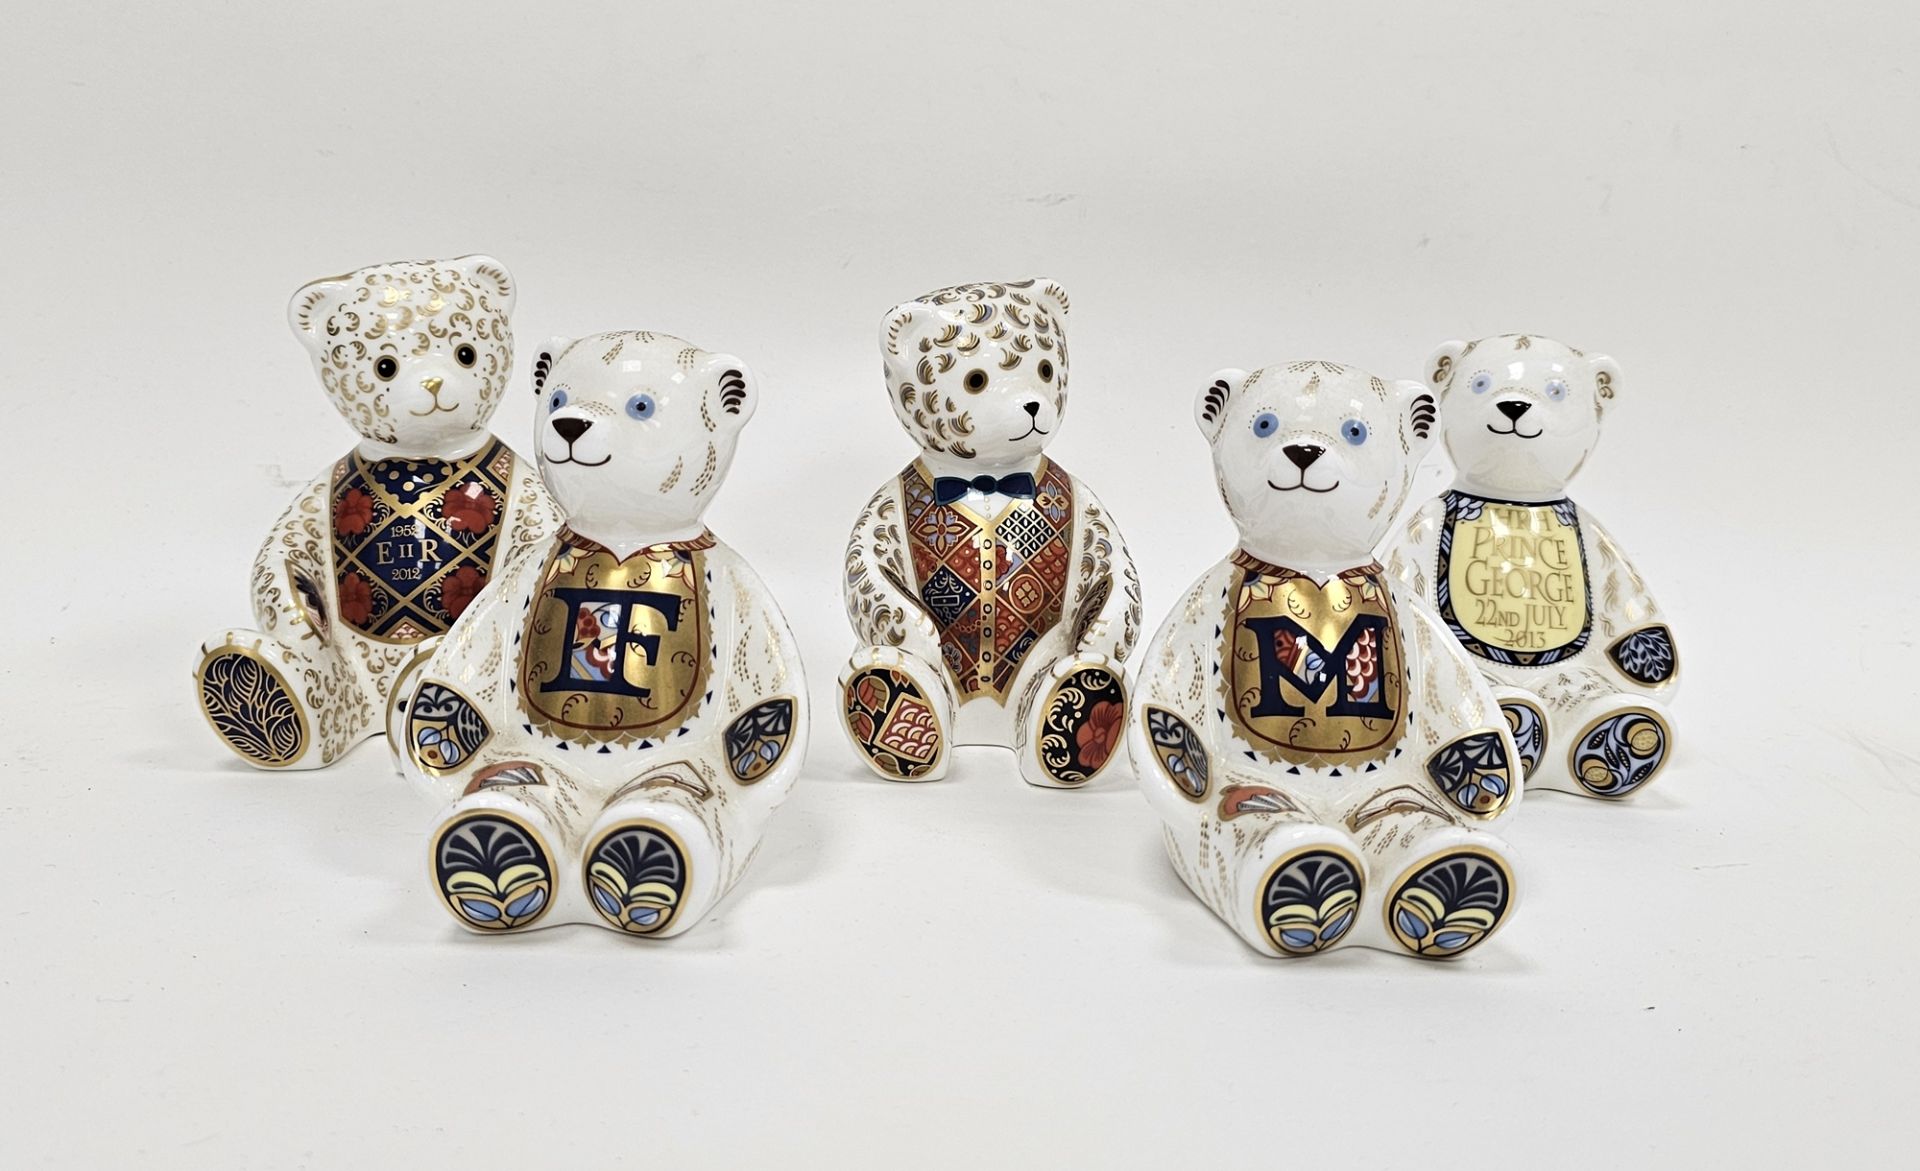 Five Royal Crown Derby bone china paperweights modelled as teddy bears, including The HRH Prince